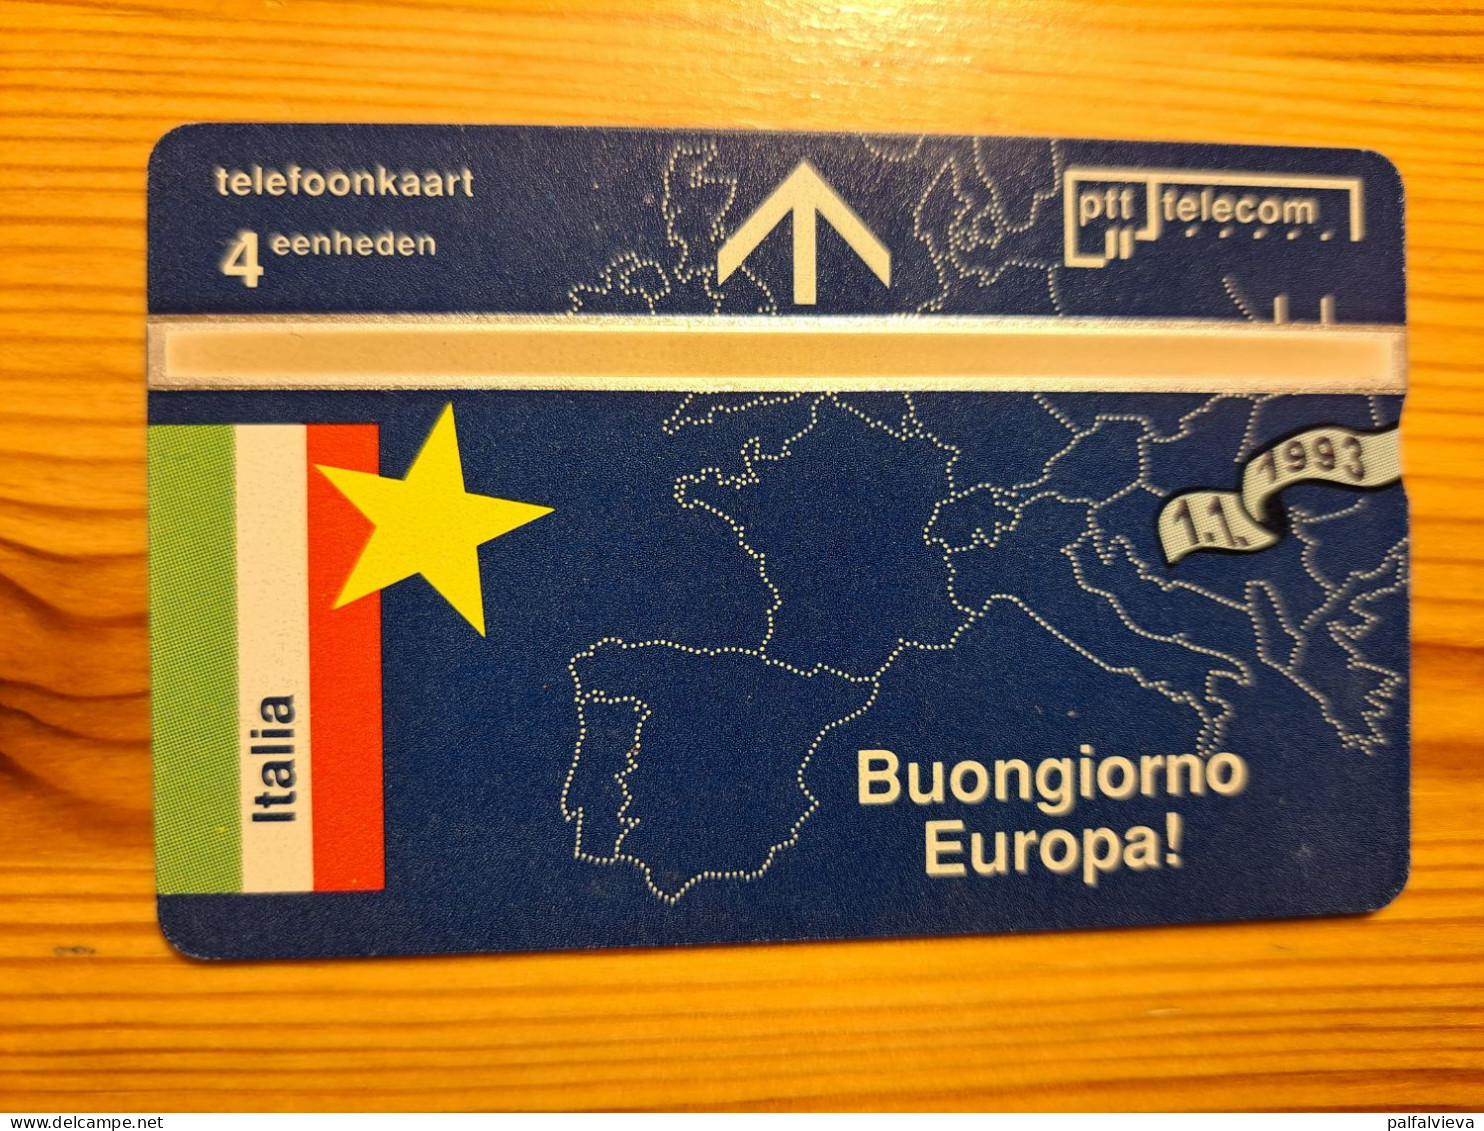 Phonecard Netherlands 008D - European Union, Italy - Private